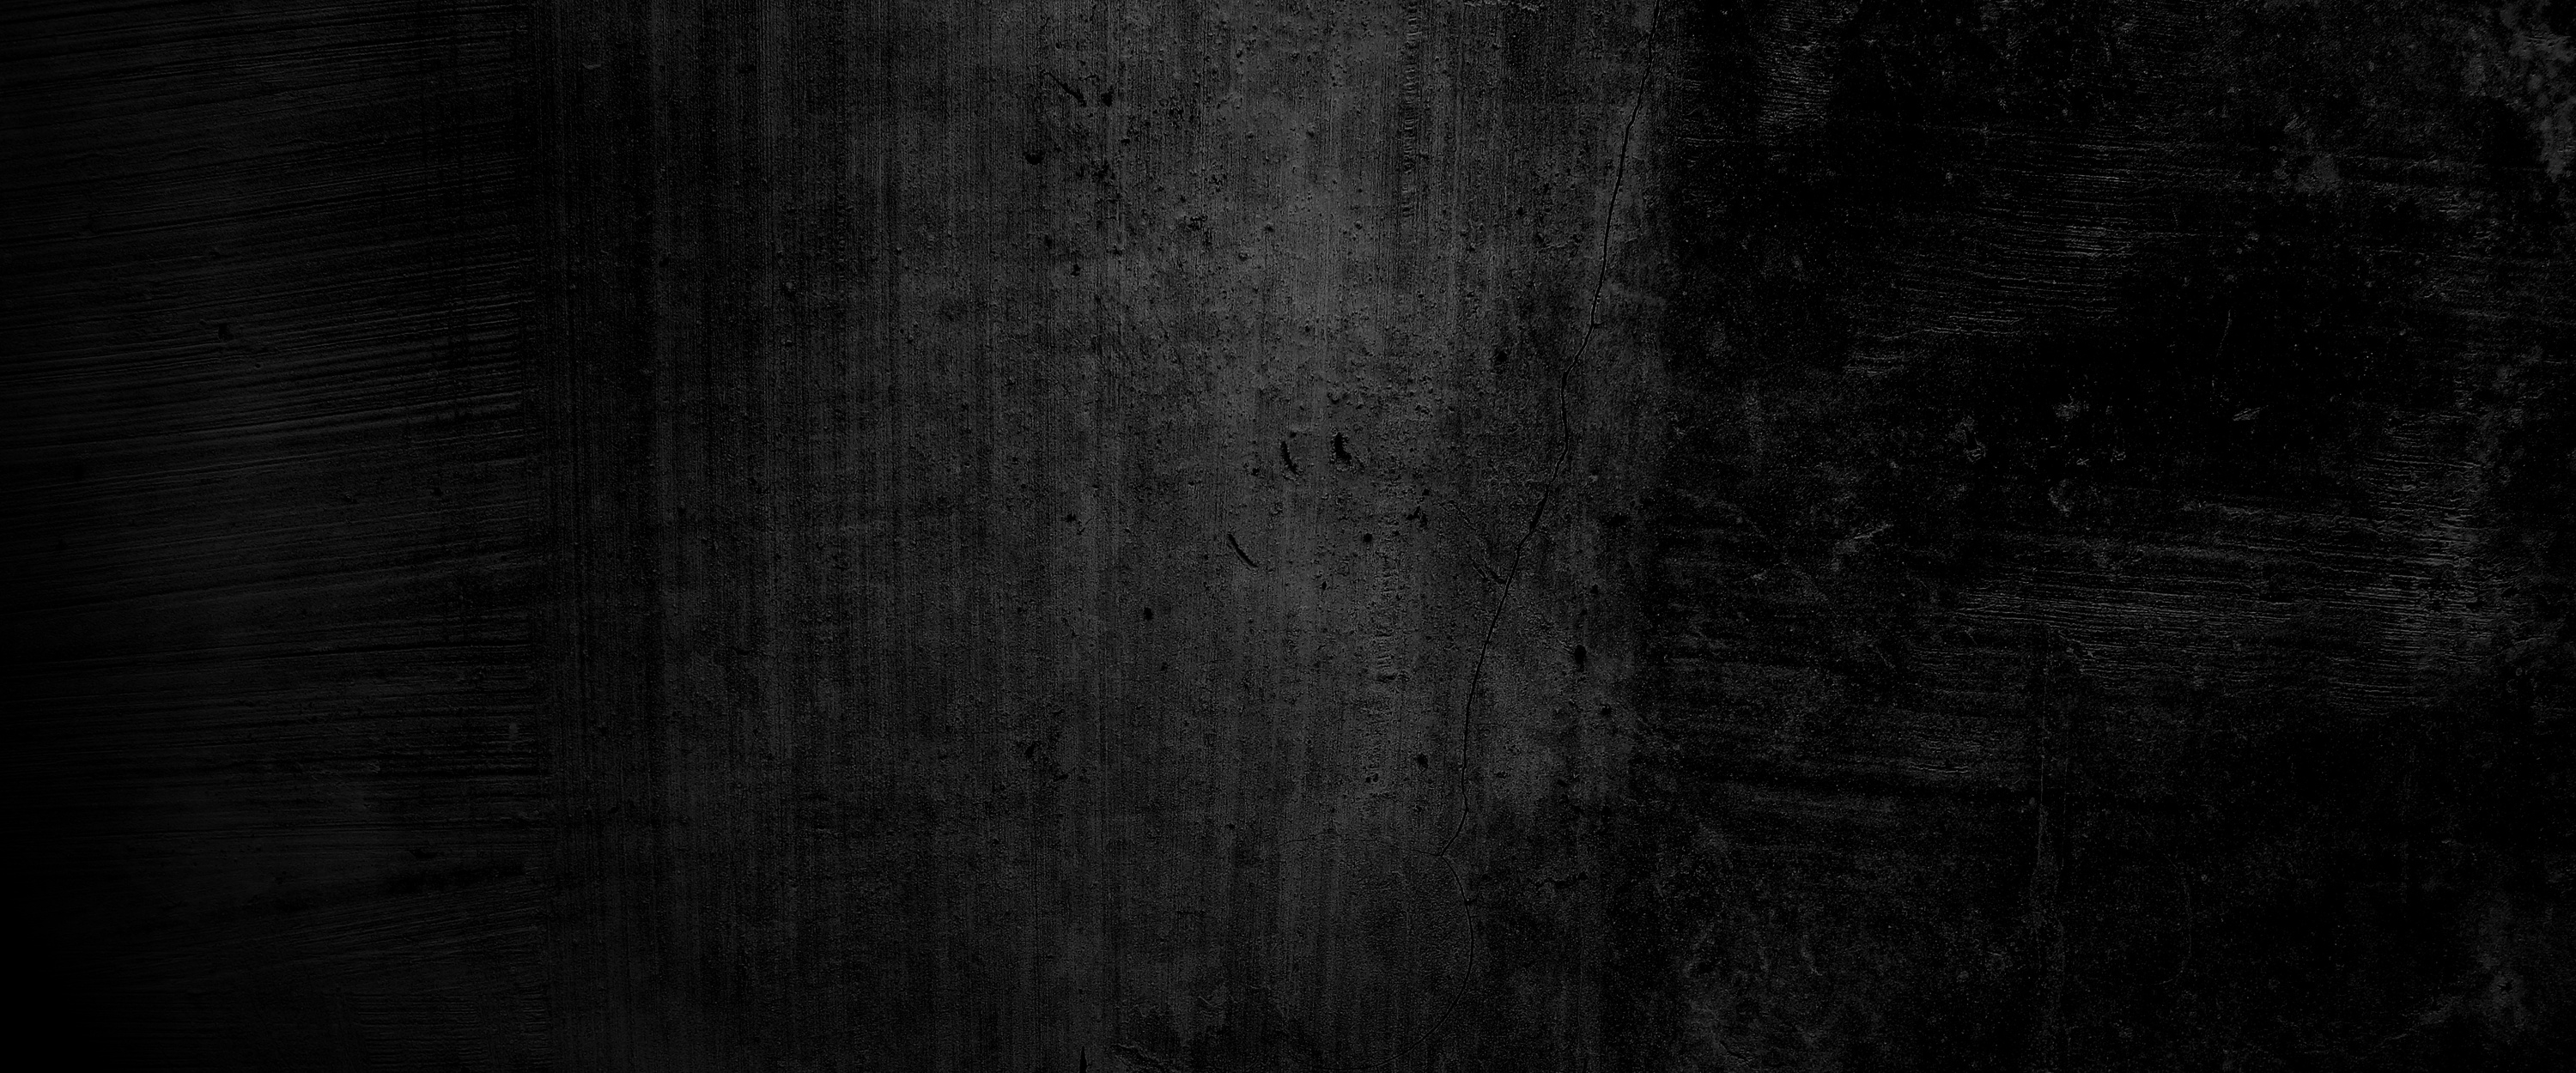 Dark Scary Wall Cement Background